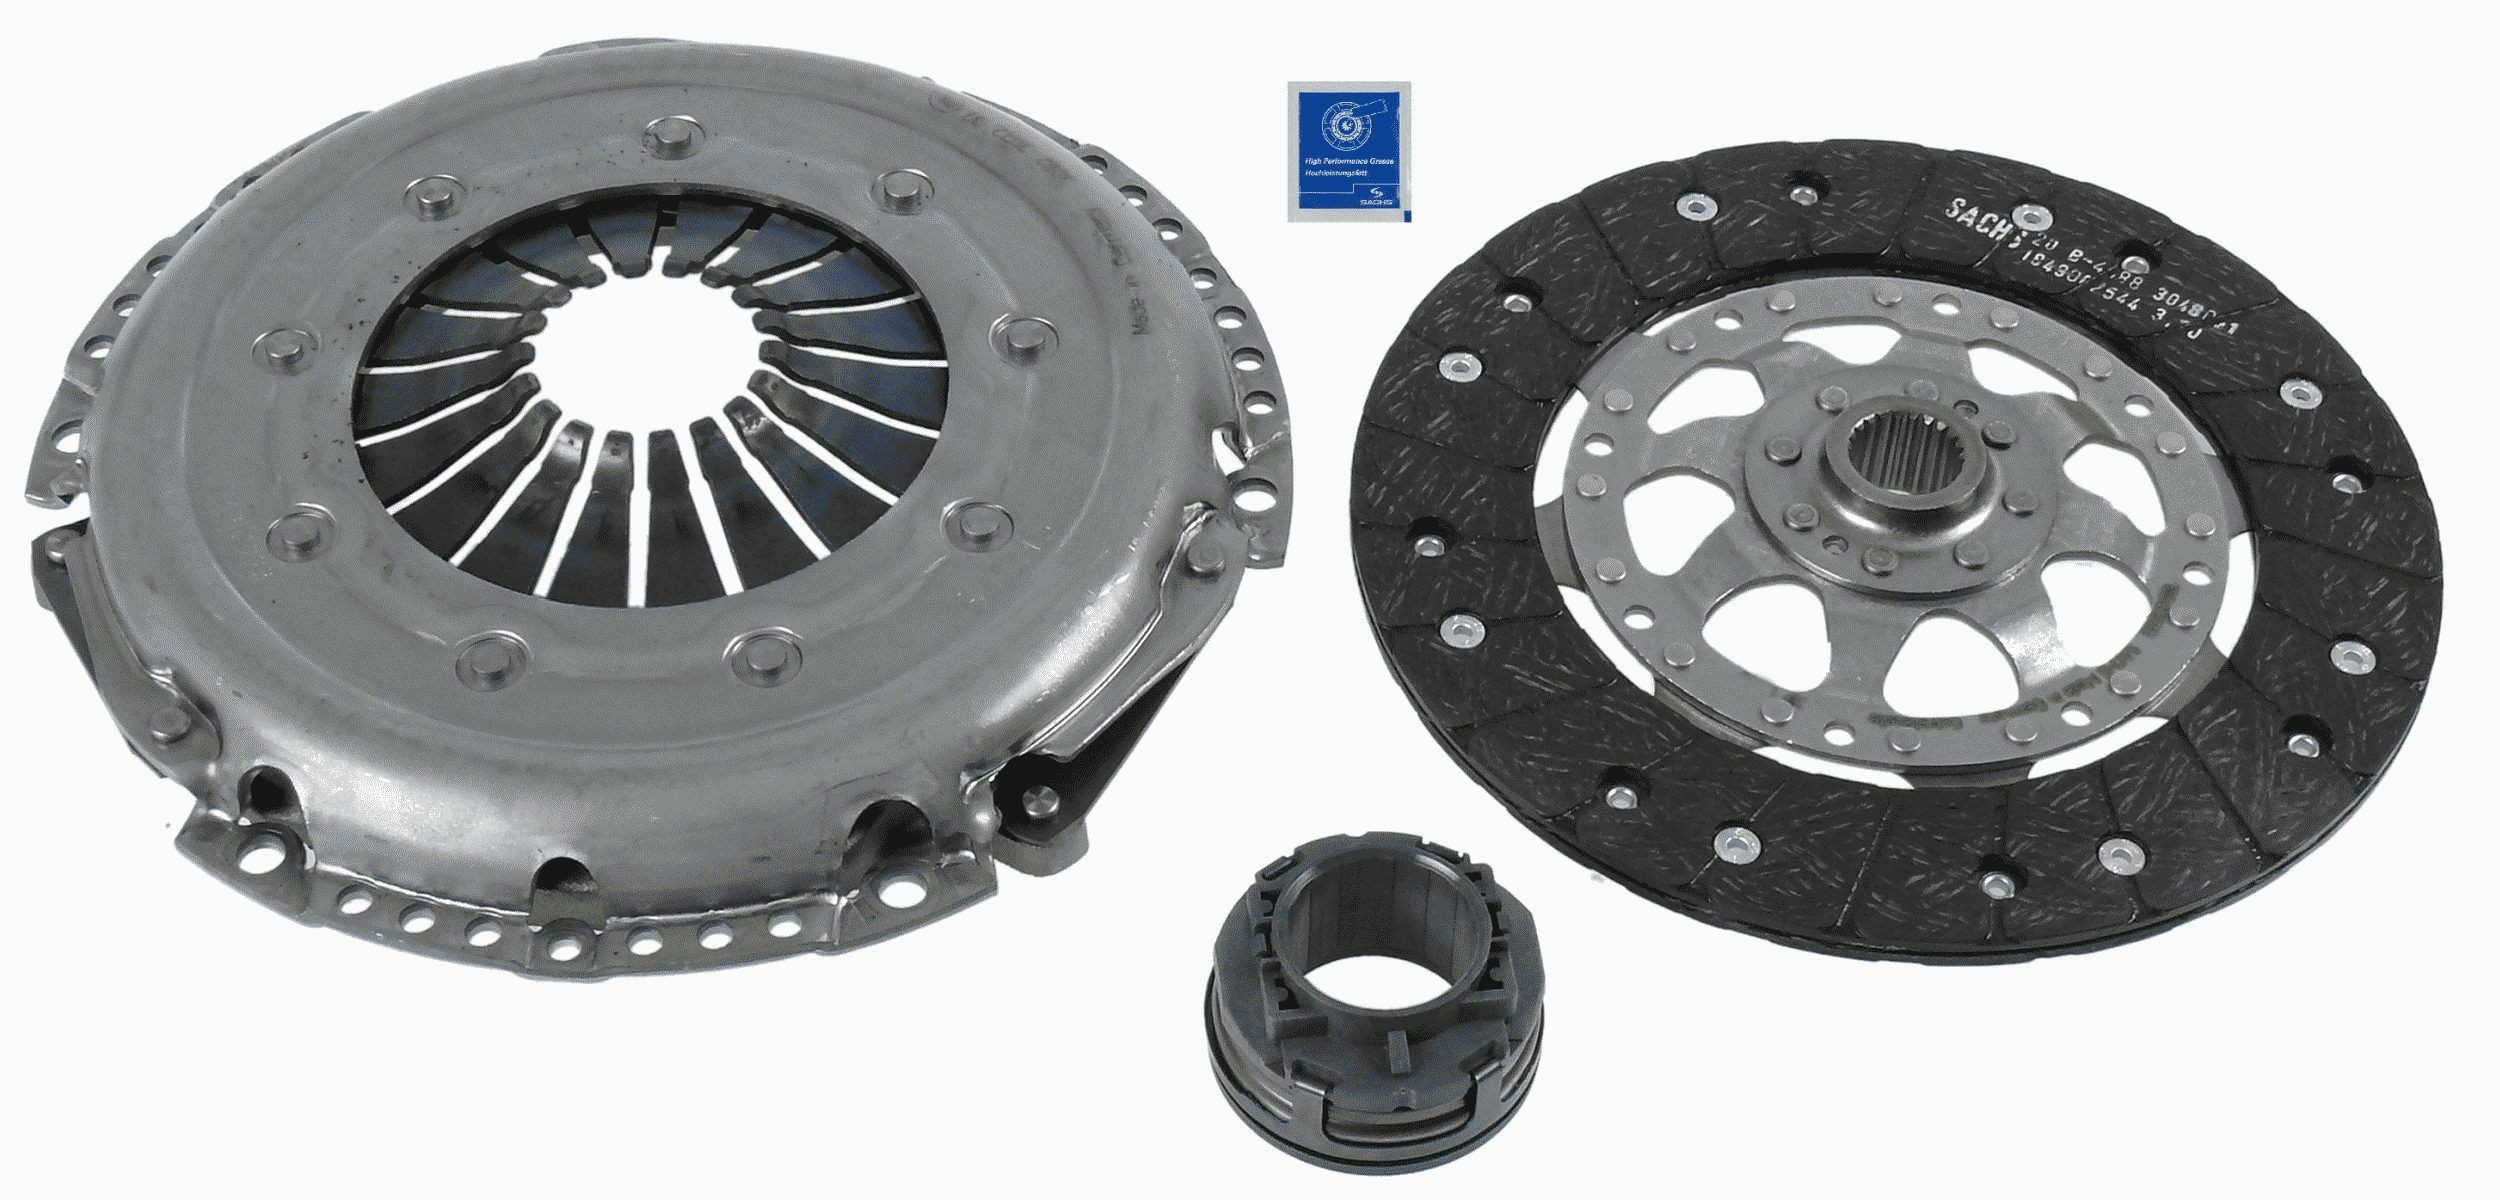 SACHS 3000951210 Clutch replacement kit 228mm